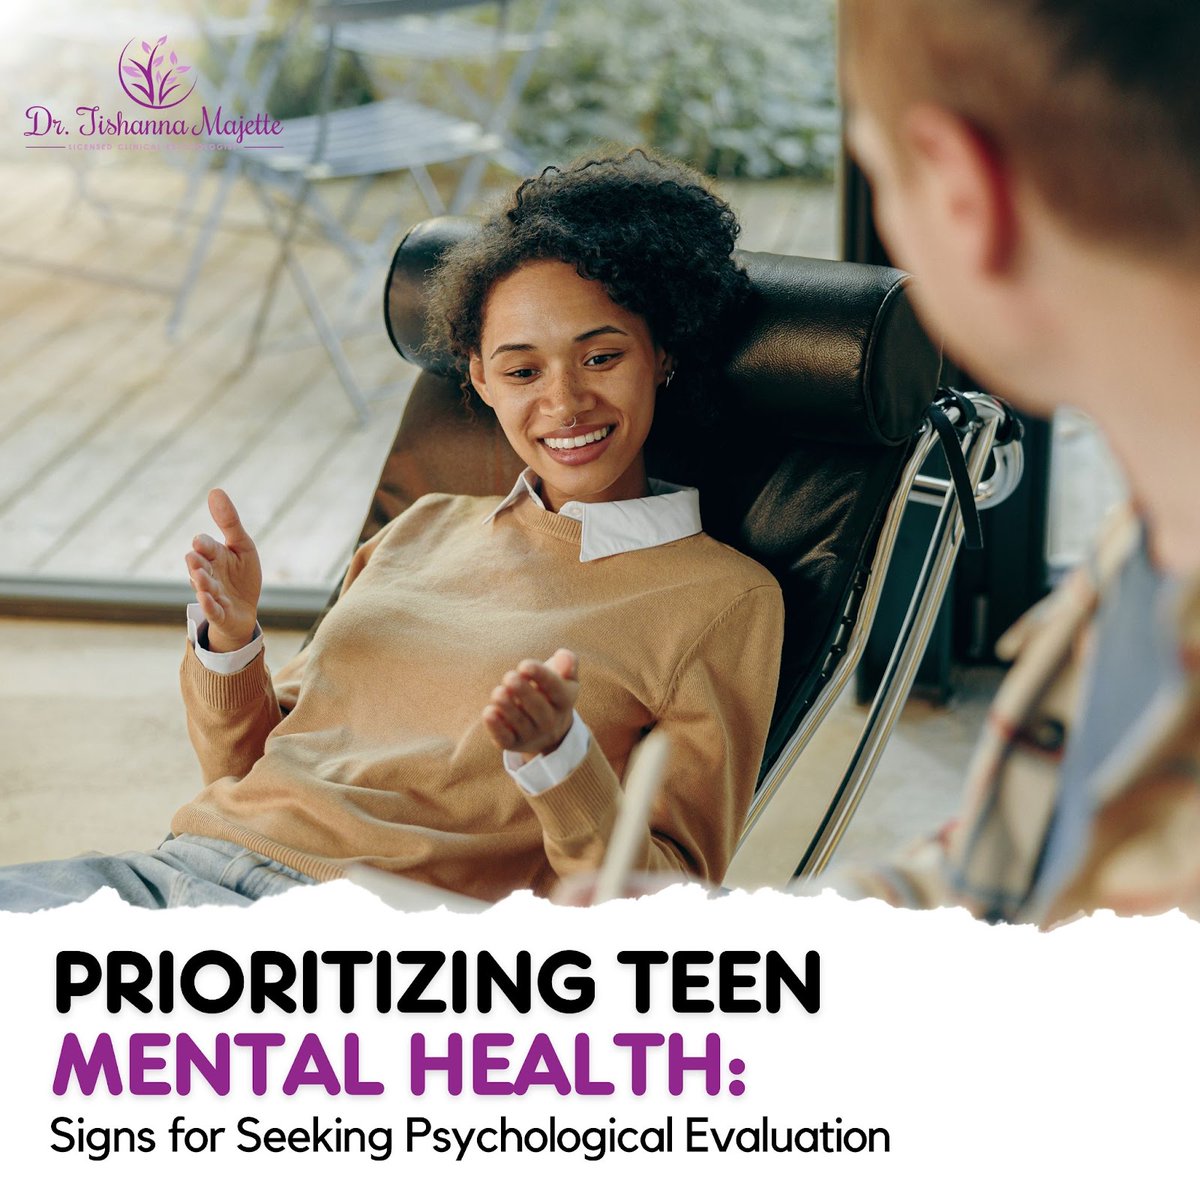 Prioritize your teen's mental health by recognizing key signs that may necessitate a psychological evaluation.
------
📧 doc@majetteadolescentservices.com or
📞 856-522-3123
.
.
.
#TeenMentalHealth #PsychologicalEvaluation #EarlyDetection #AdolescentWellness #TeenTherapy